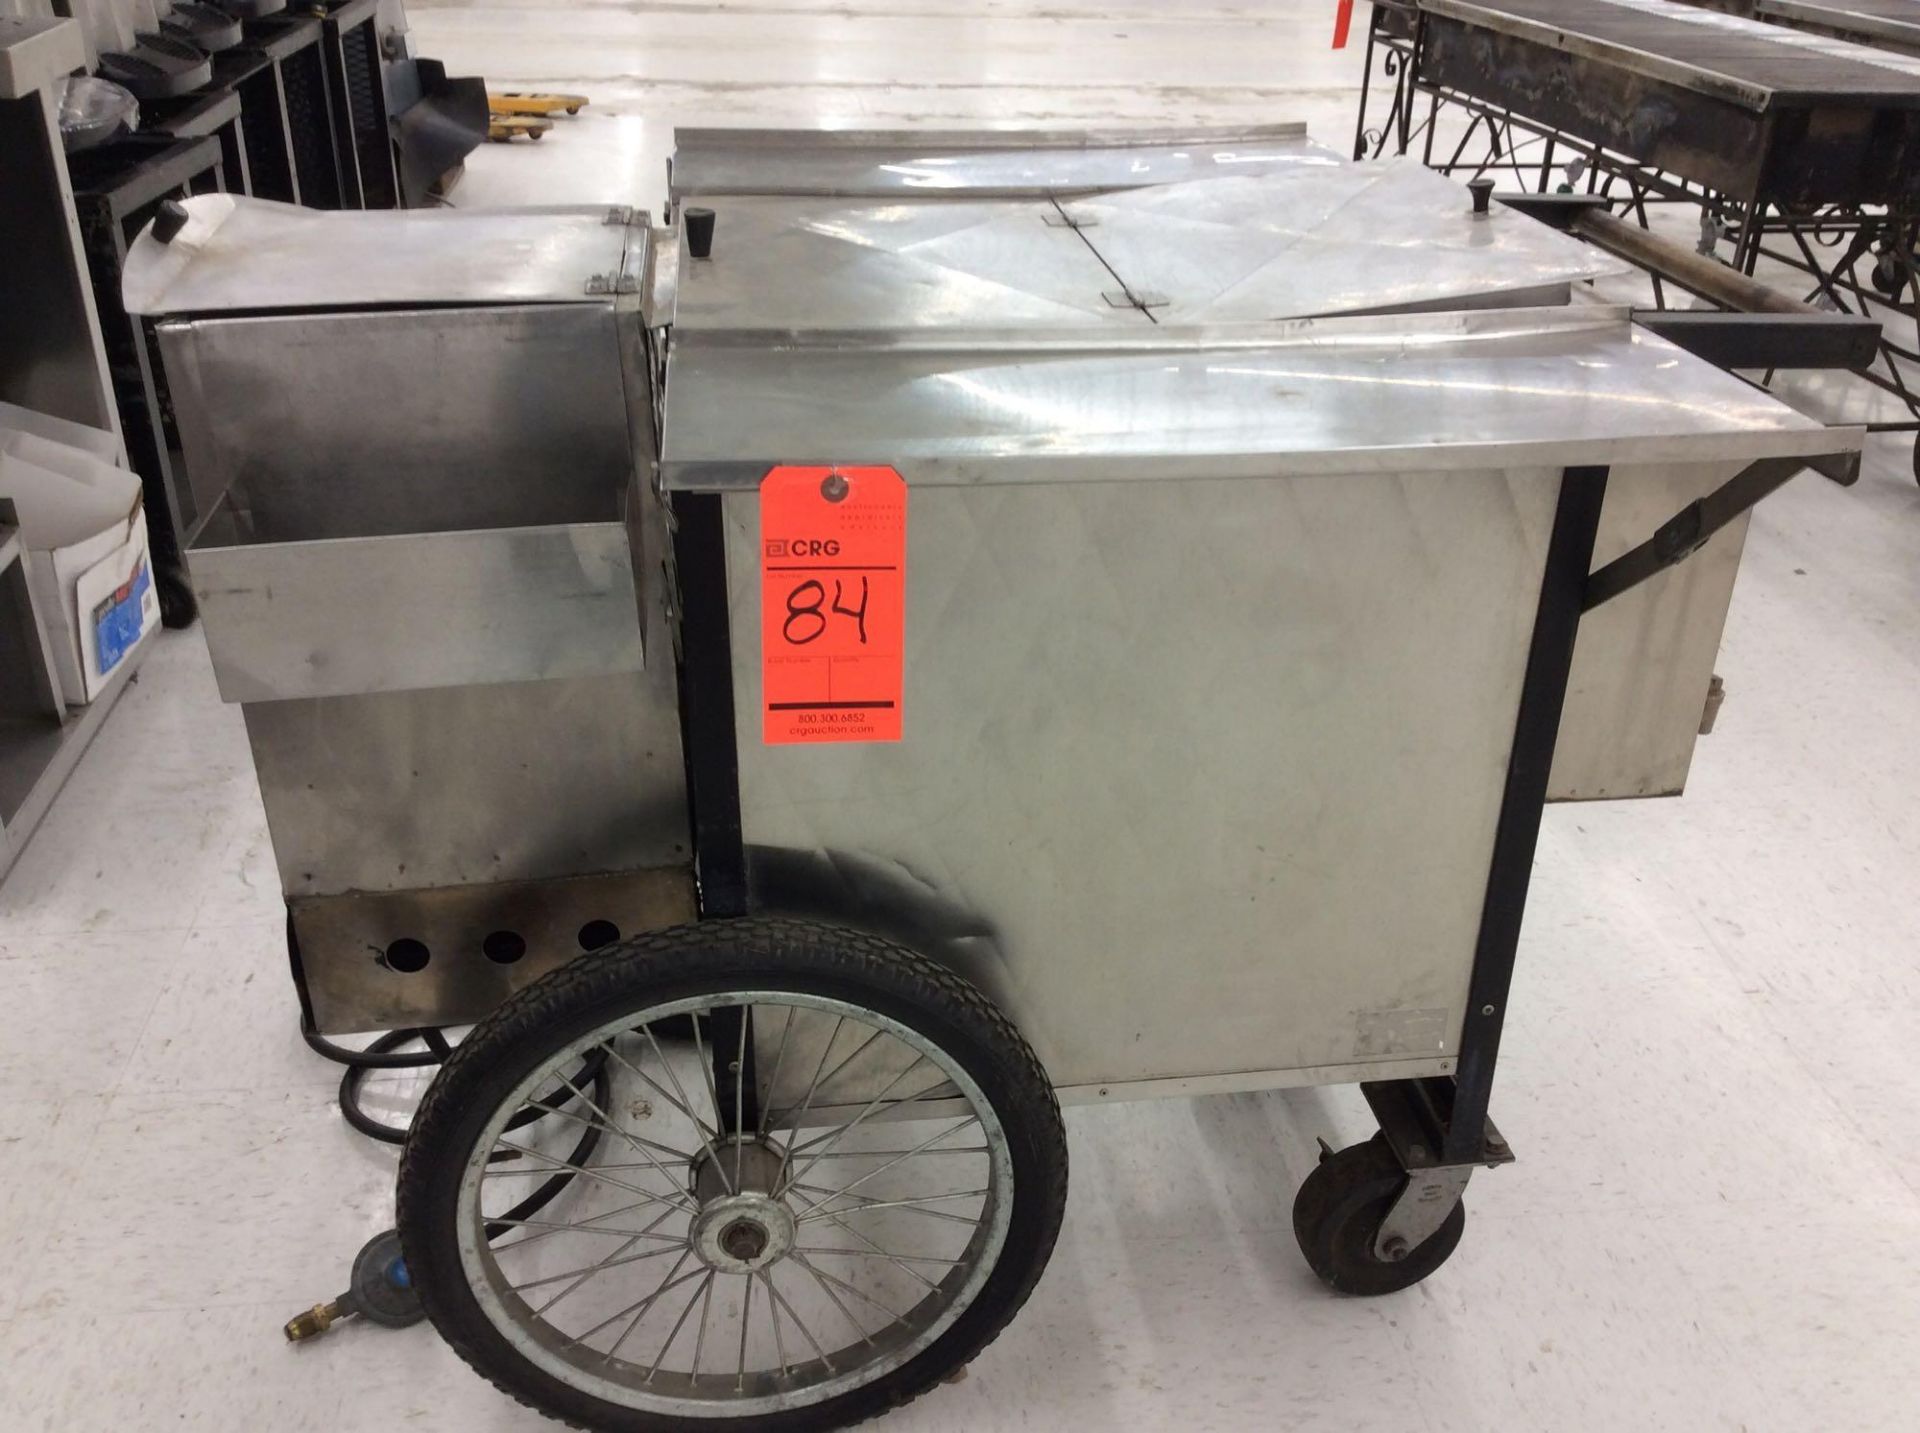 Propane powered Hotdog Cooker and Vending Cart, with insulated food storage compartment